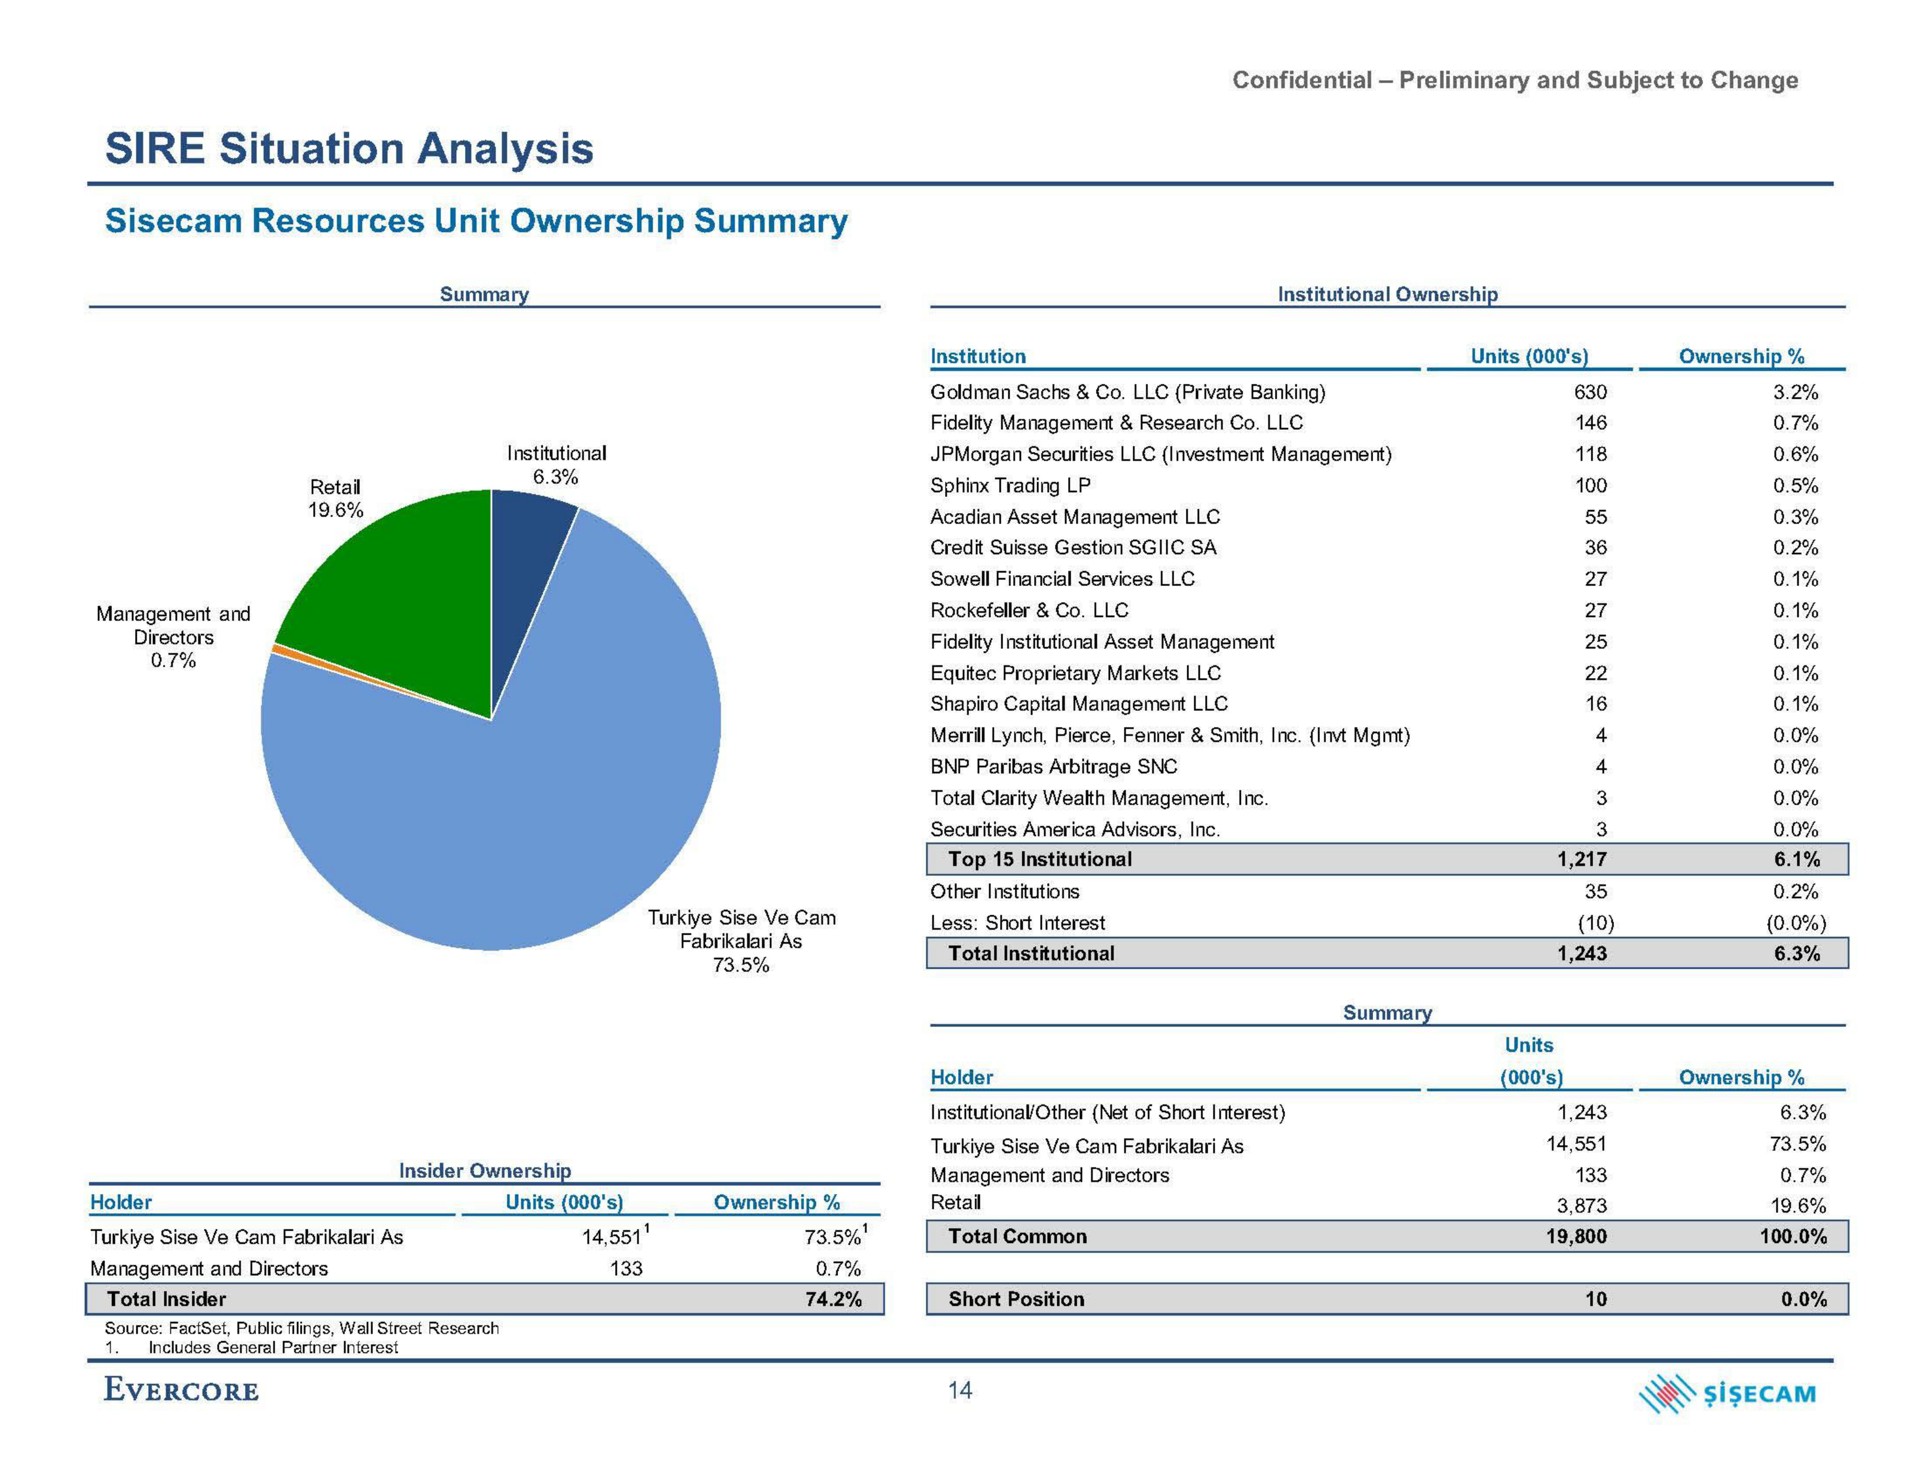 sire situation analysis resources unit ownership summary retail nae sphinx trading as total institutional | Evercore